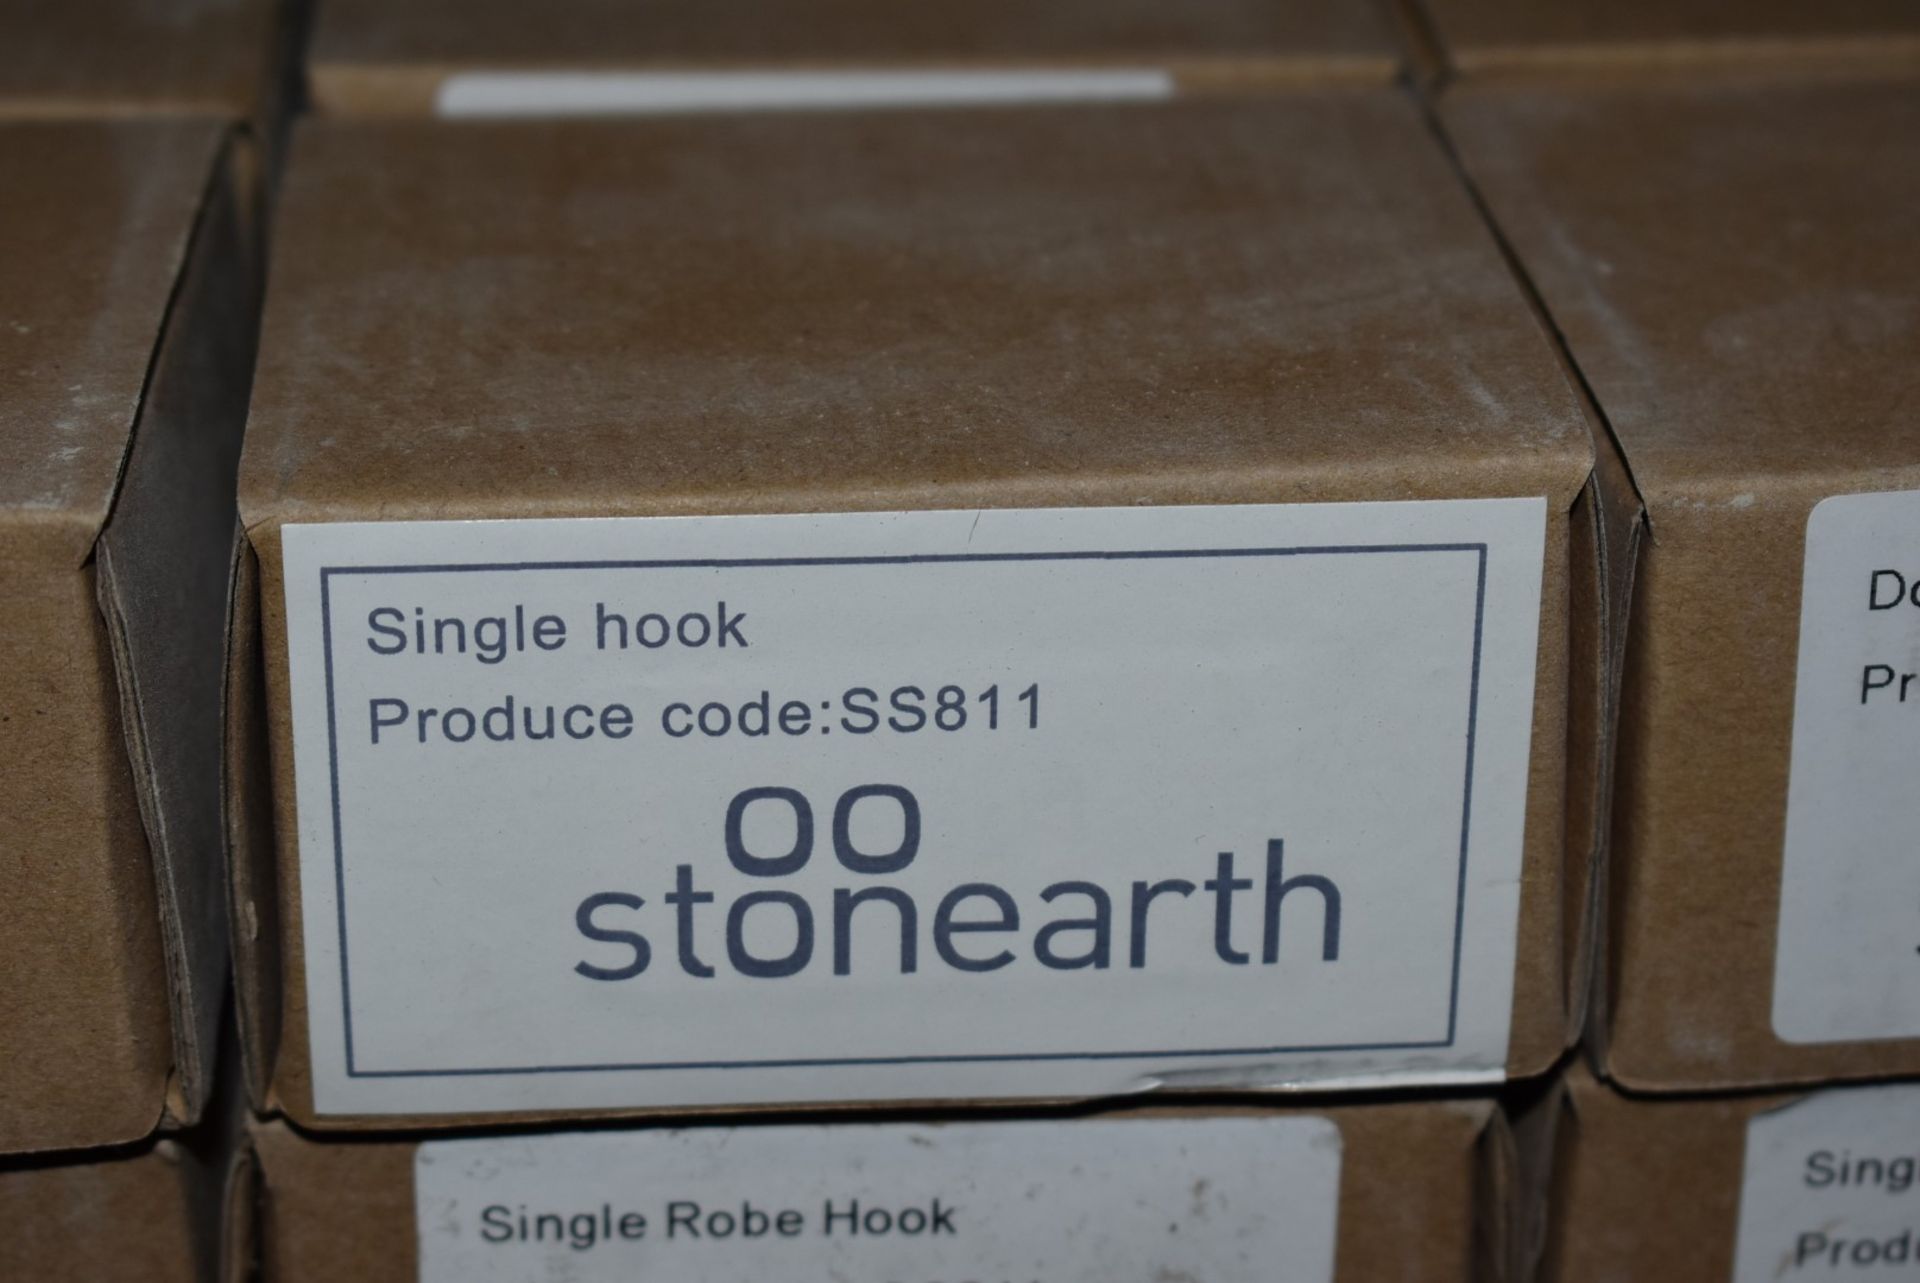 1 x Stonearth Single Robe Hook - Solid Stainless Steel Bathroom Accessory - Brand New & Boxed - - Image 3 of 3